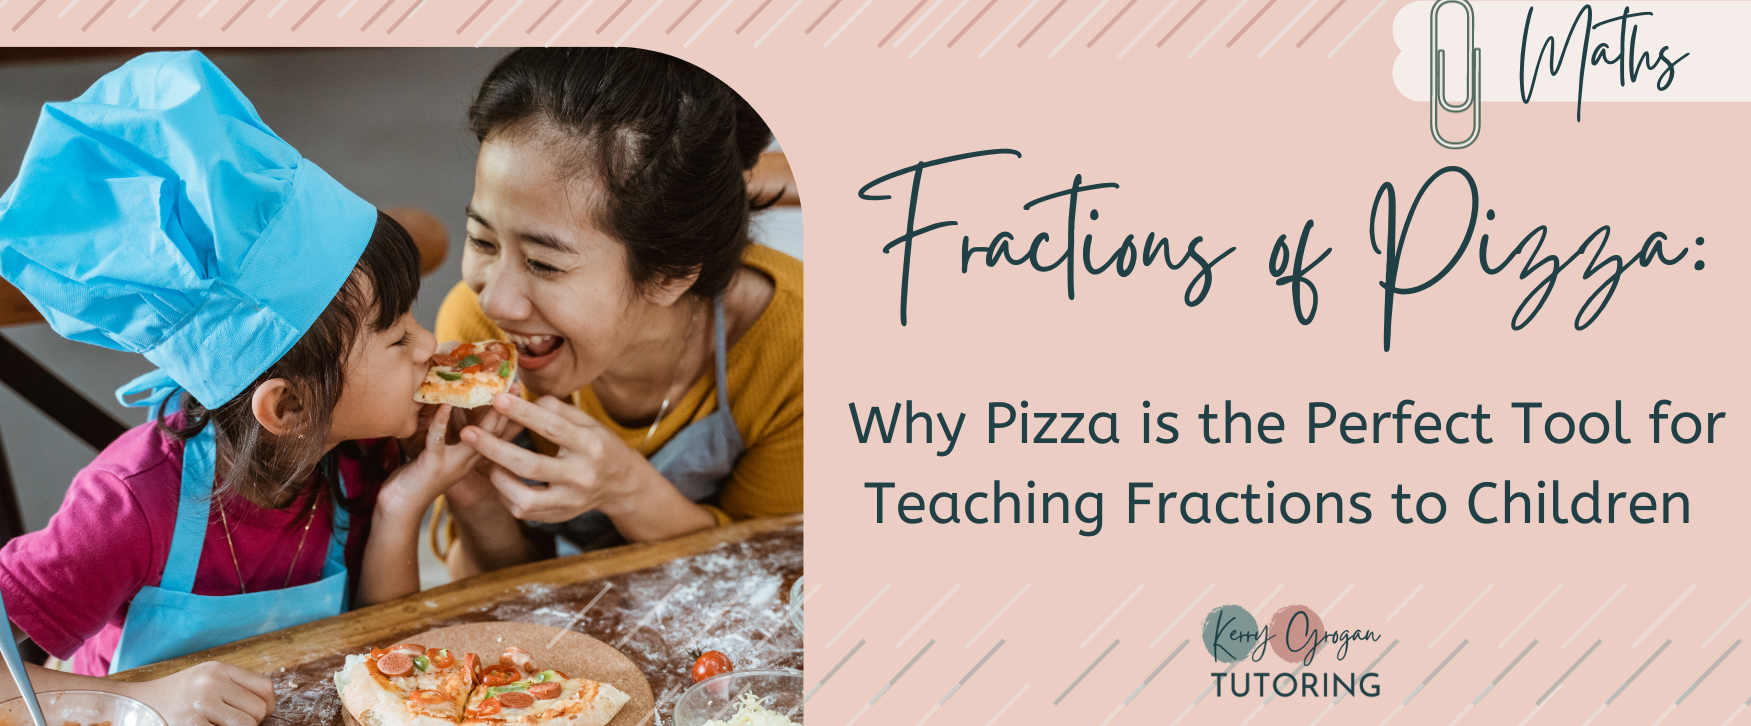 Fractions of Pizza: Why Pizza is the Perfect Tool for Teaching Fractions to Children